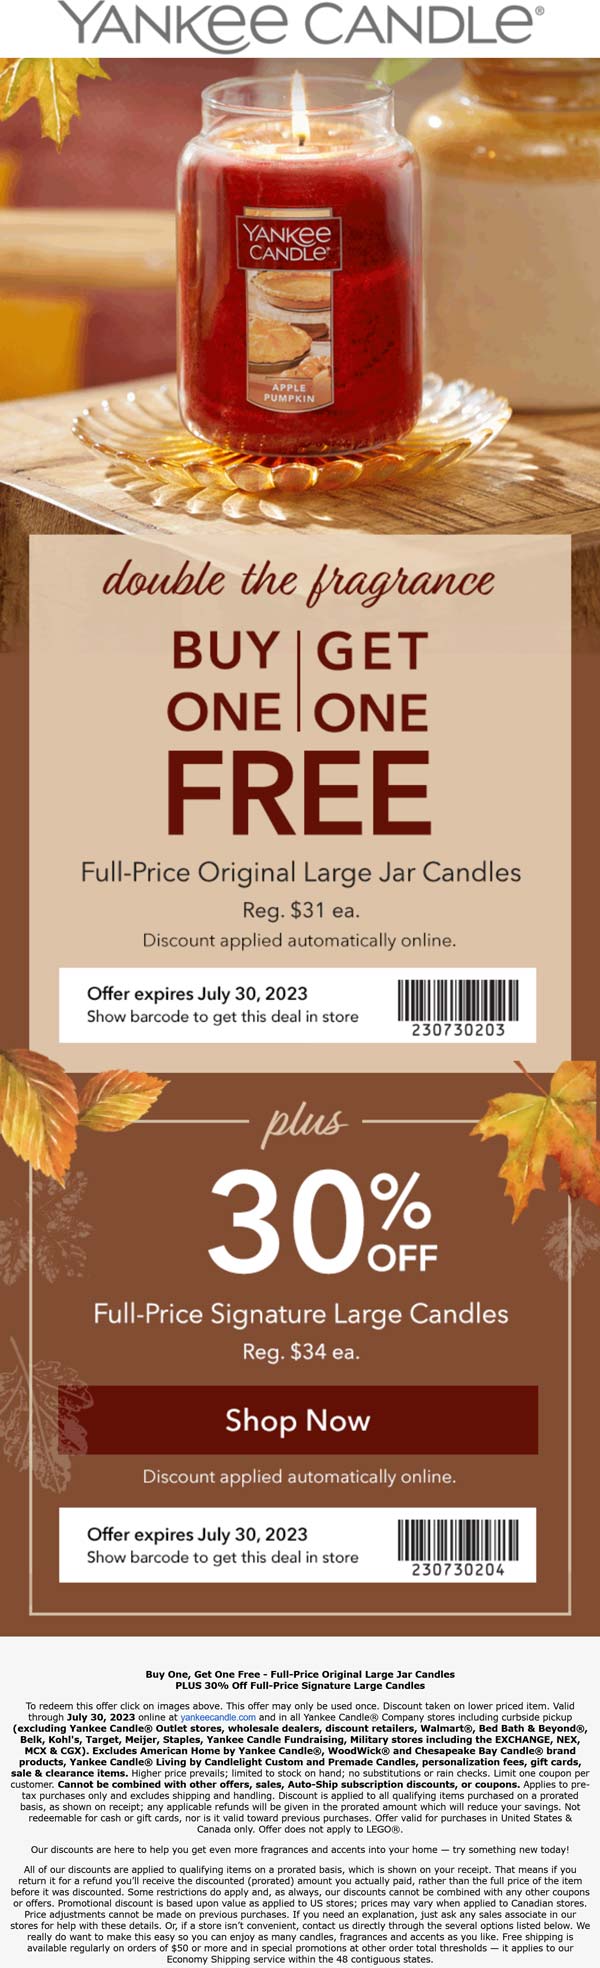 Yankee Candle stores Coupon  Second candle free at Yankee Candle, ditto online #yankeecandle 